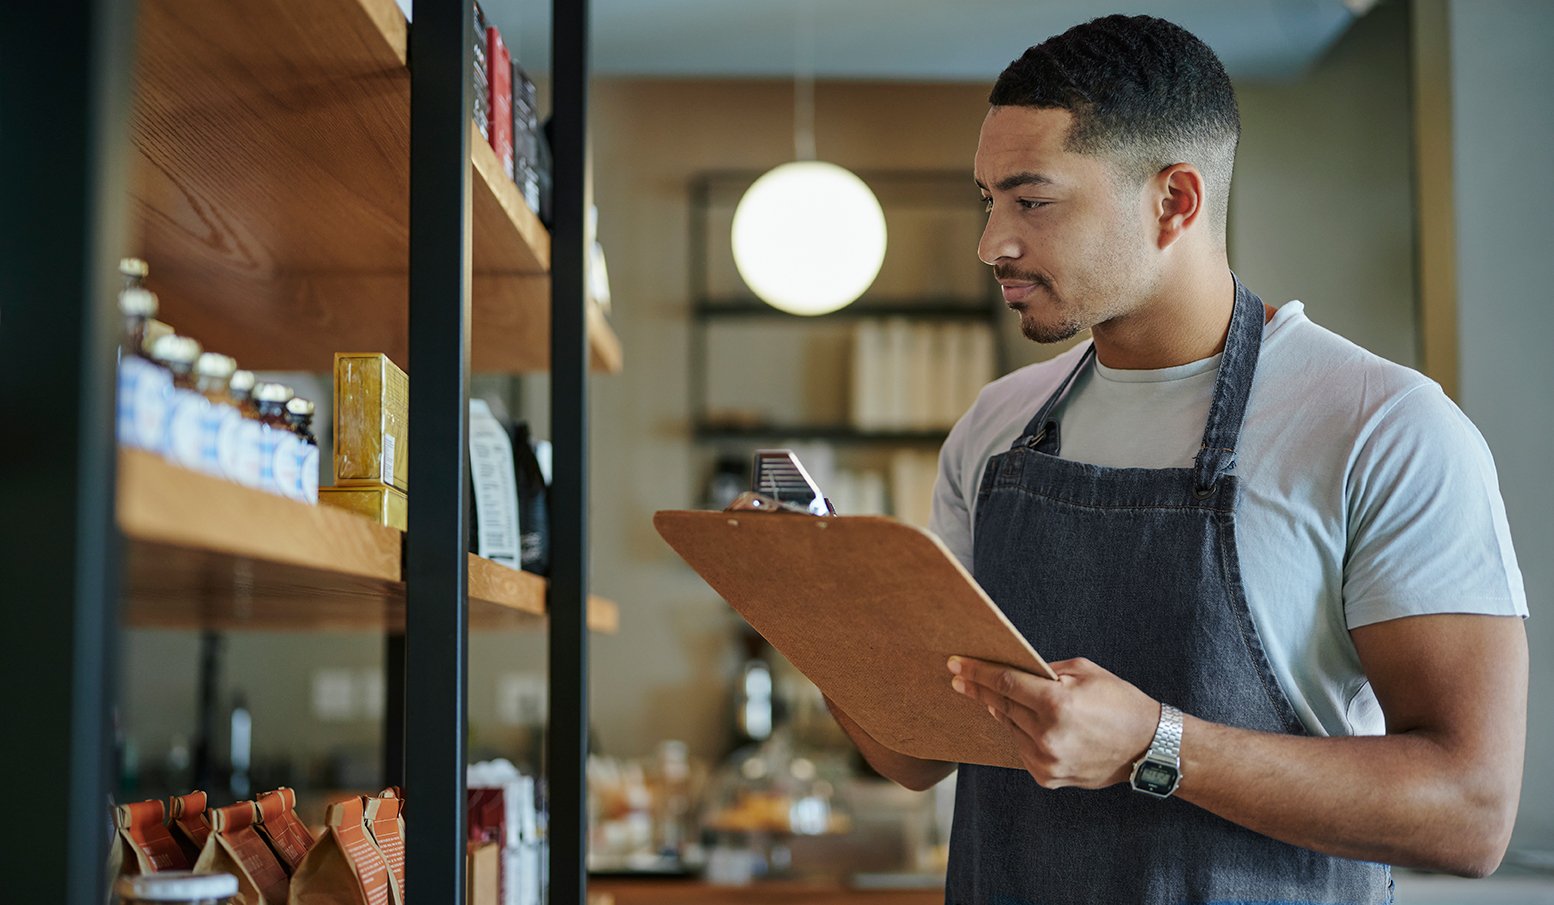 A young business owner holds a clipboard while looking at inventory on a shelf.